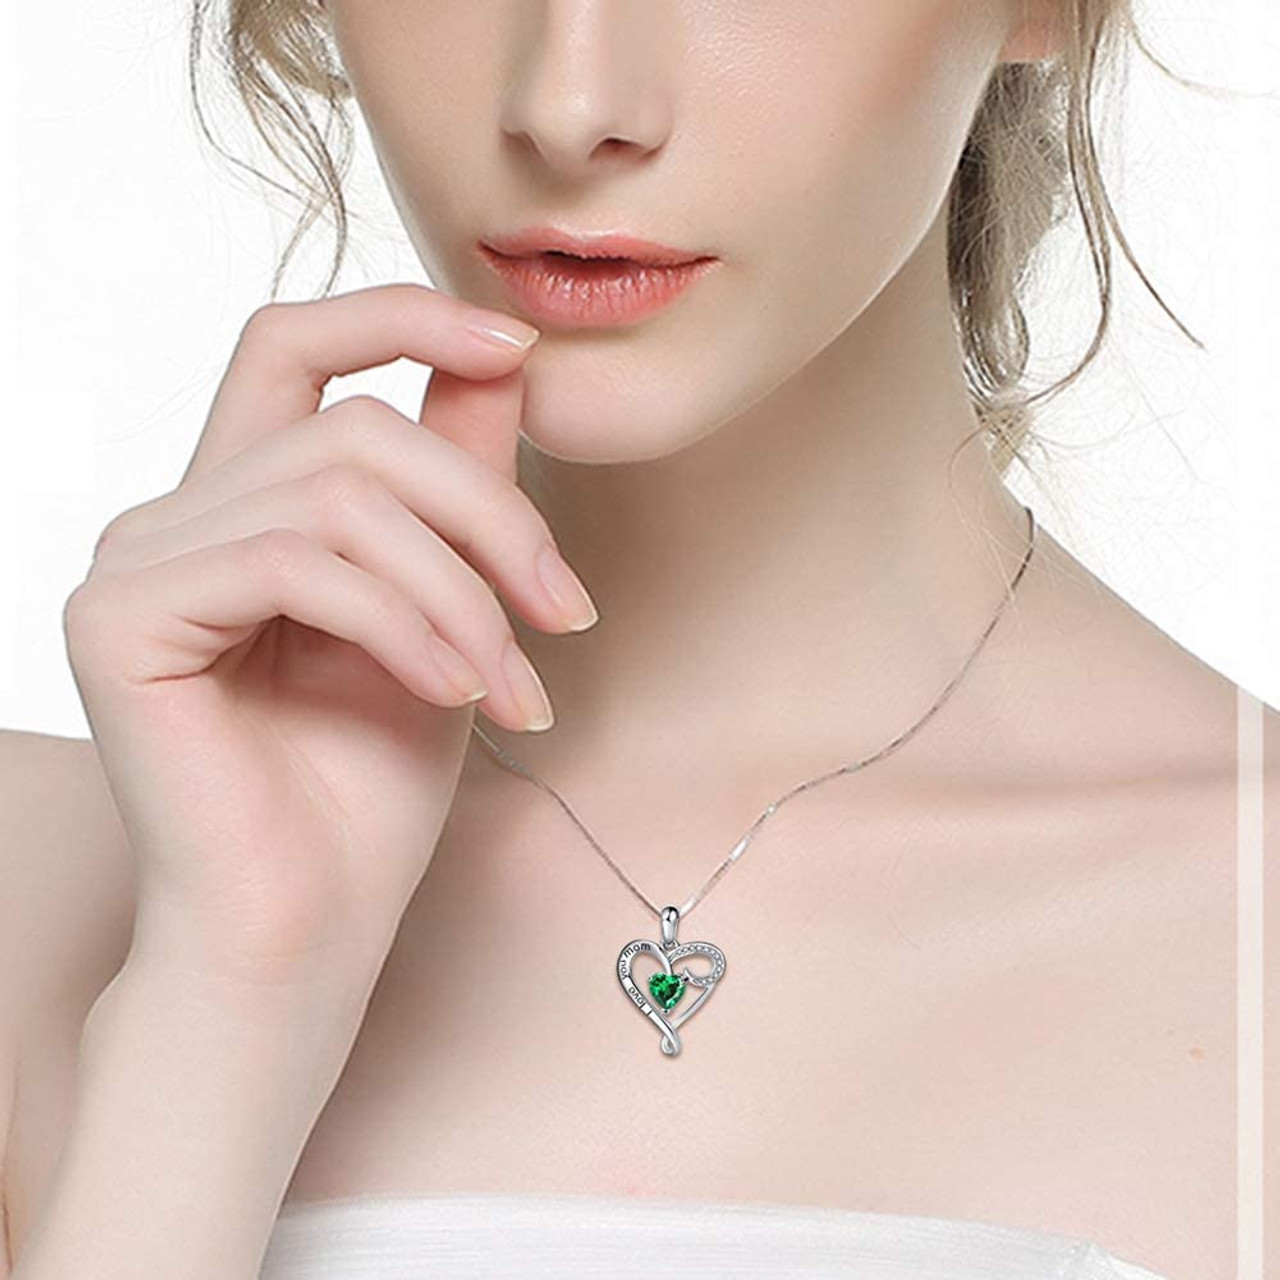 Mother's Day Gift Pendant - I Love You Mom - Dark Green Stone with Silver Tone Twisted Heart Pendant with tiny CZ stones - with 18" Chain Necklace. Gift for mom, grandma, mama, grandmother's birthday jewelry, etc.